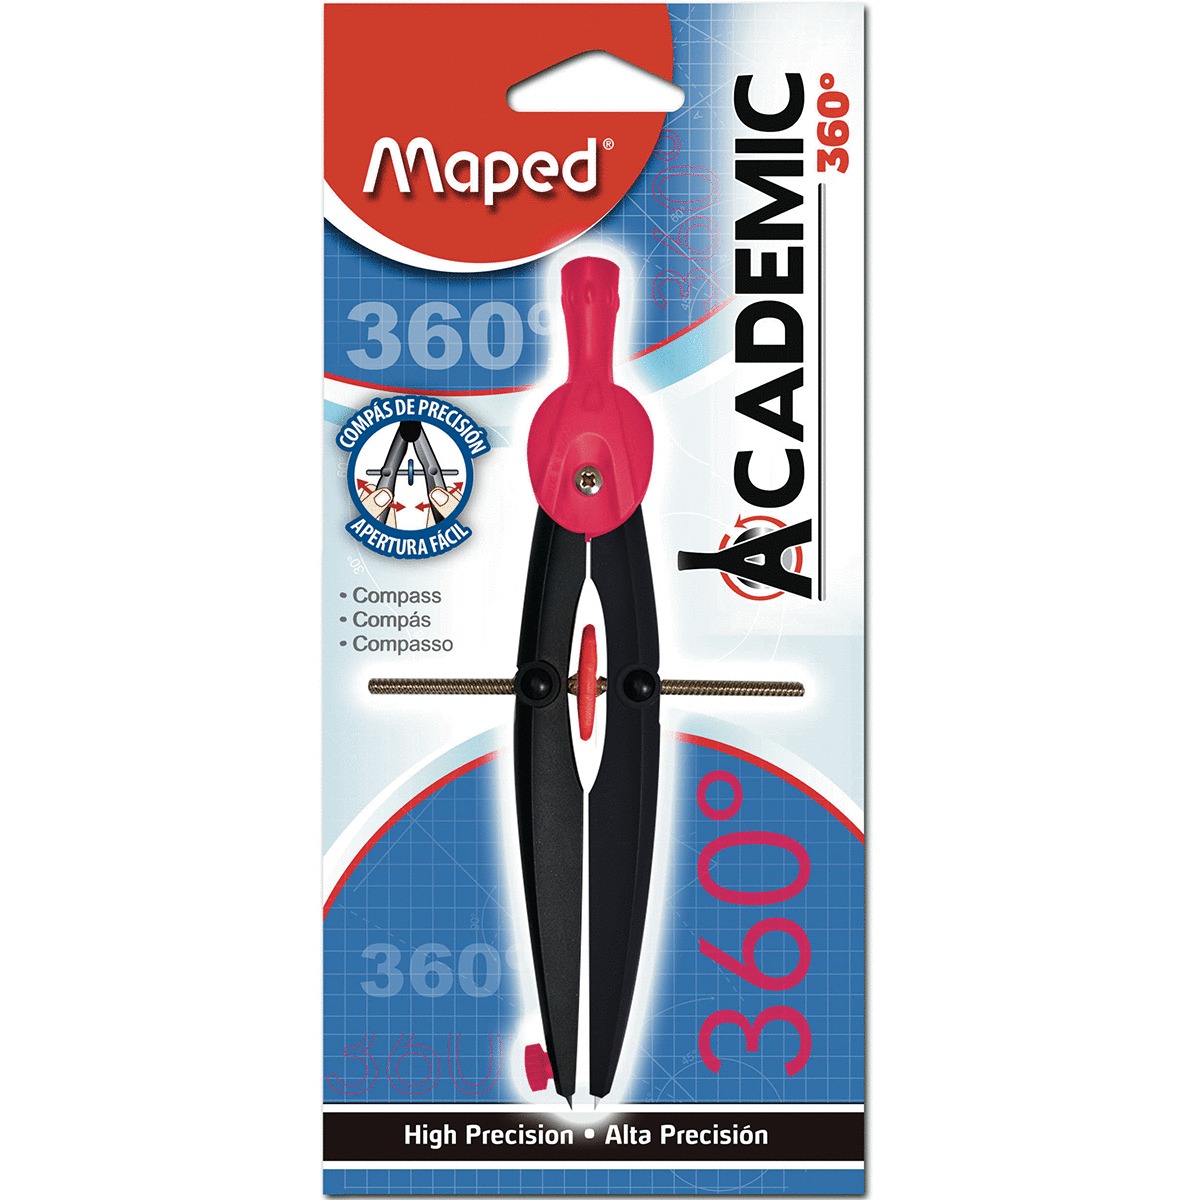 COMPAS MAPED ACADEMIC (NEGRO) | Office Depot Mexico